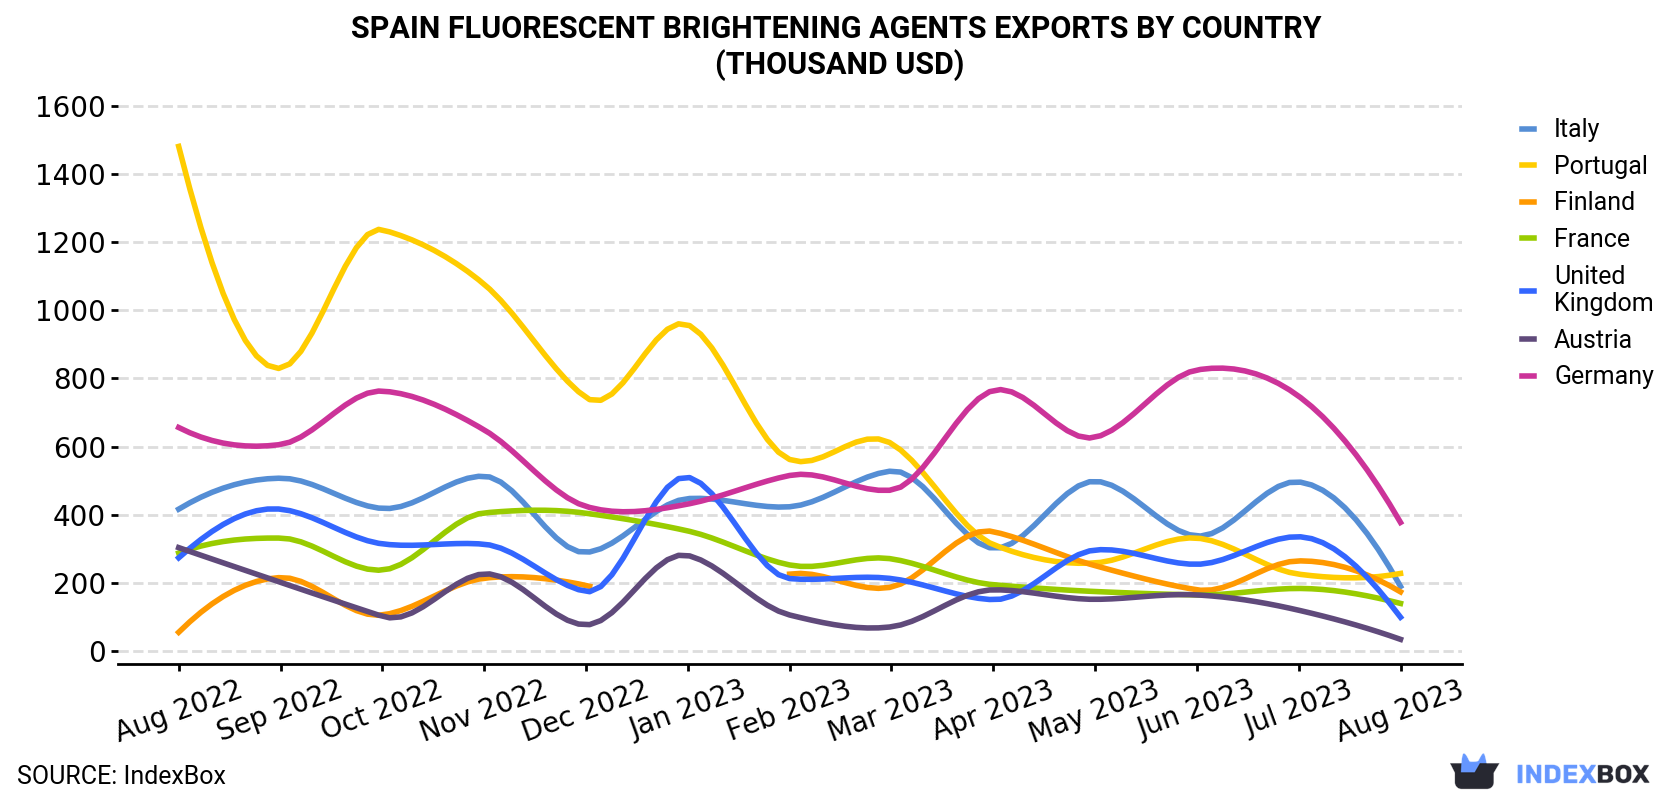 Spain Fluorescent Brightening Agents Exports By Country (Thousand USD)